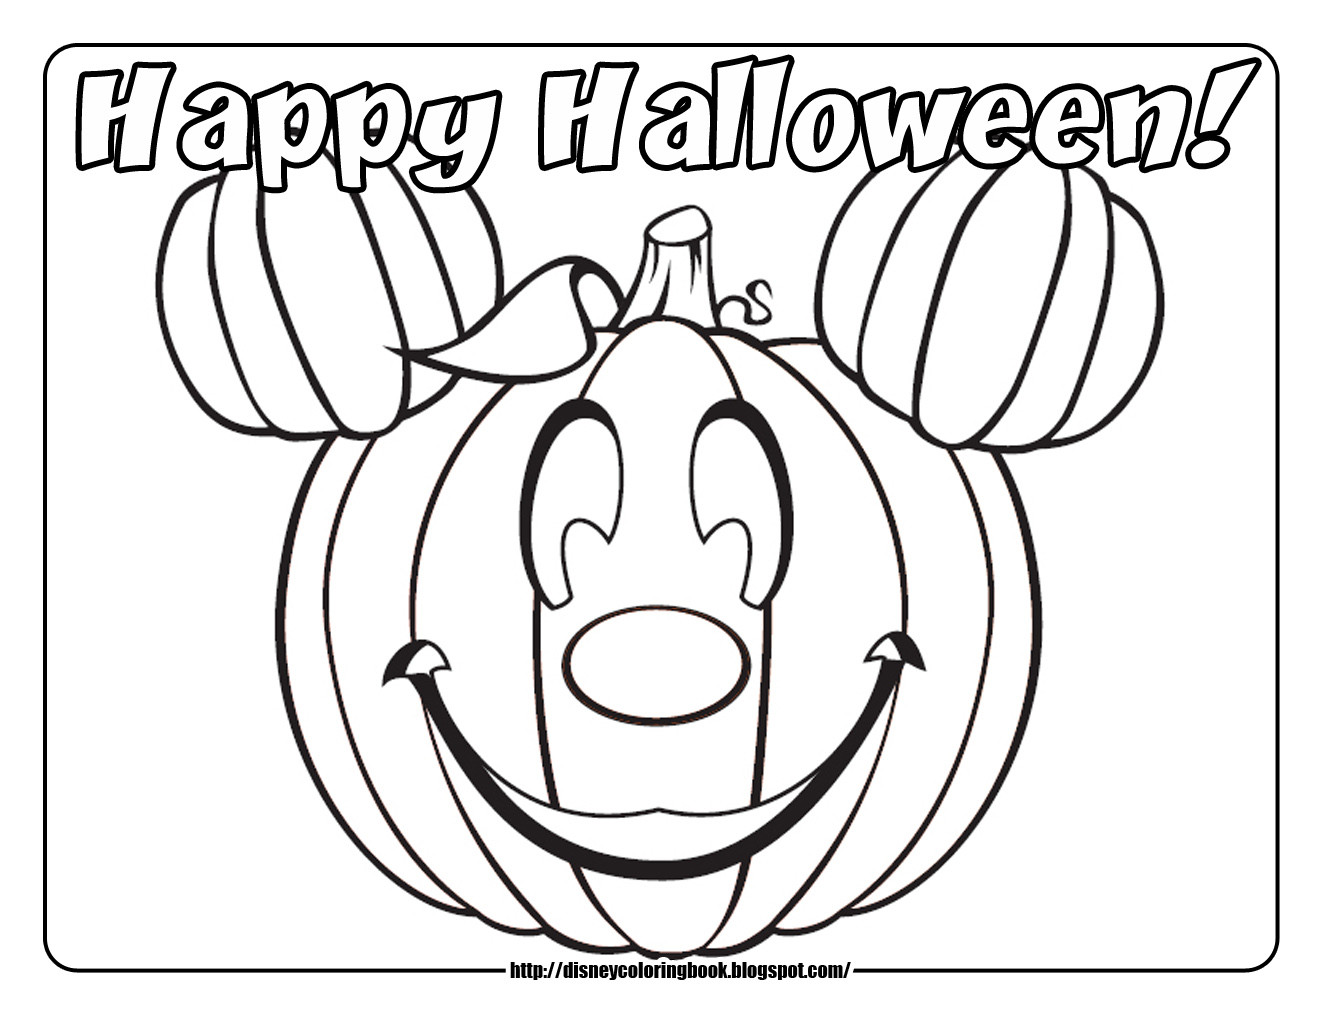 Printable Halloween Coloring Pages For Kids
 Disney Coloring Pages and Sheets for Kids